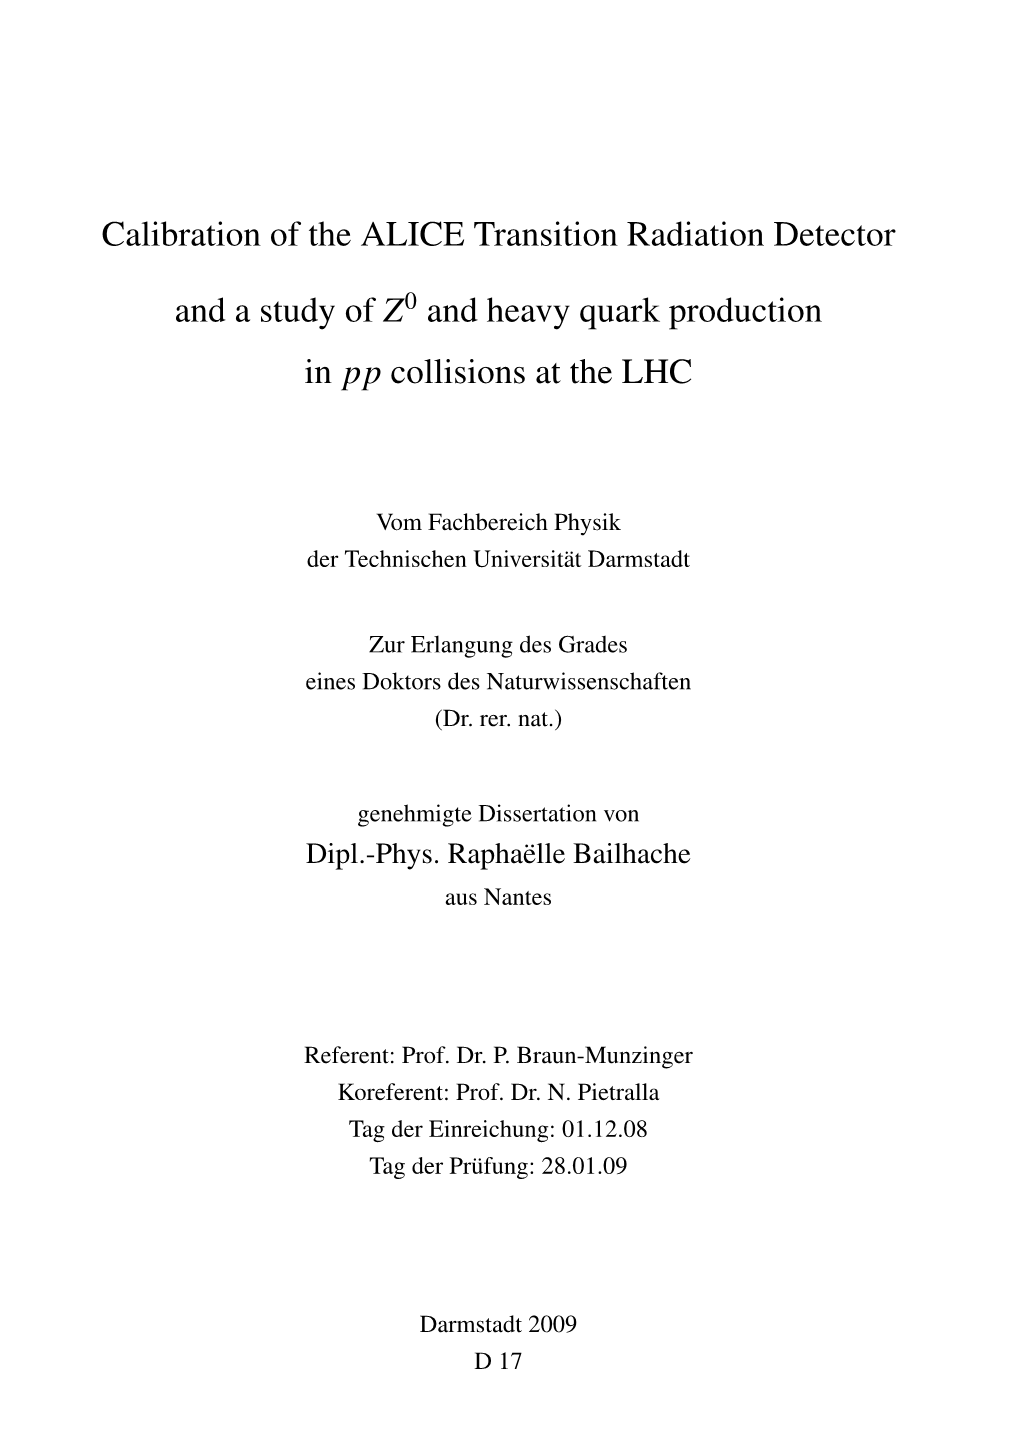 Calibration of the ALICE Transition Radiation Detector and a Study Of